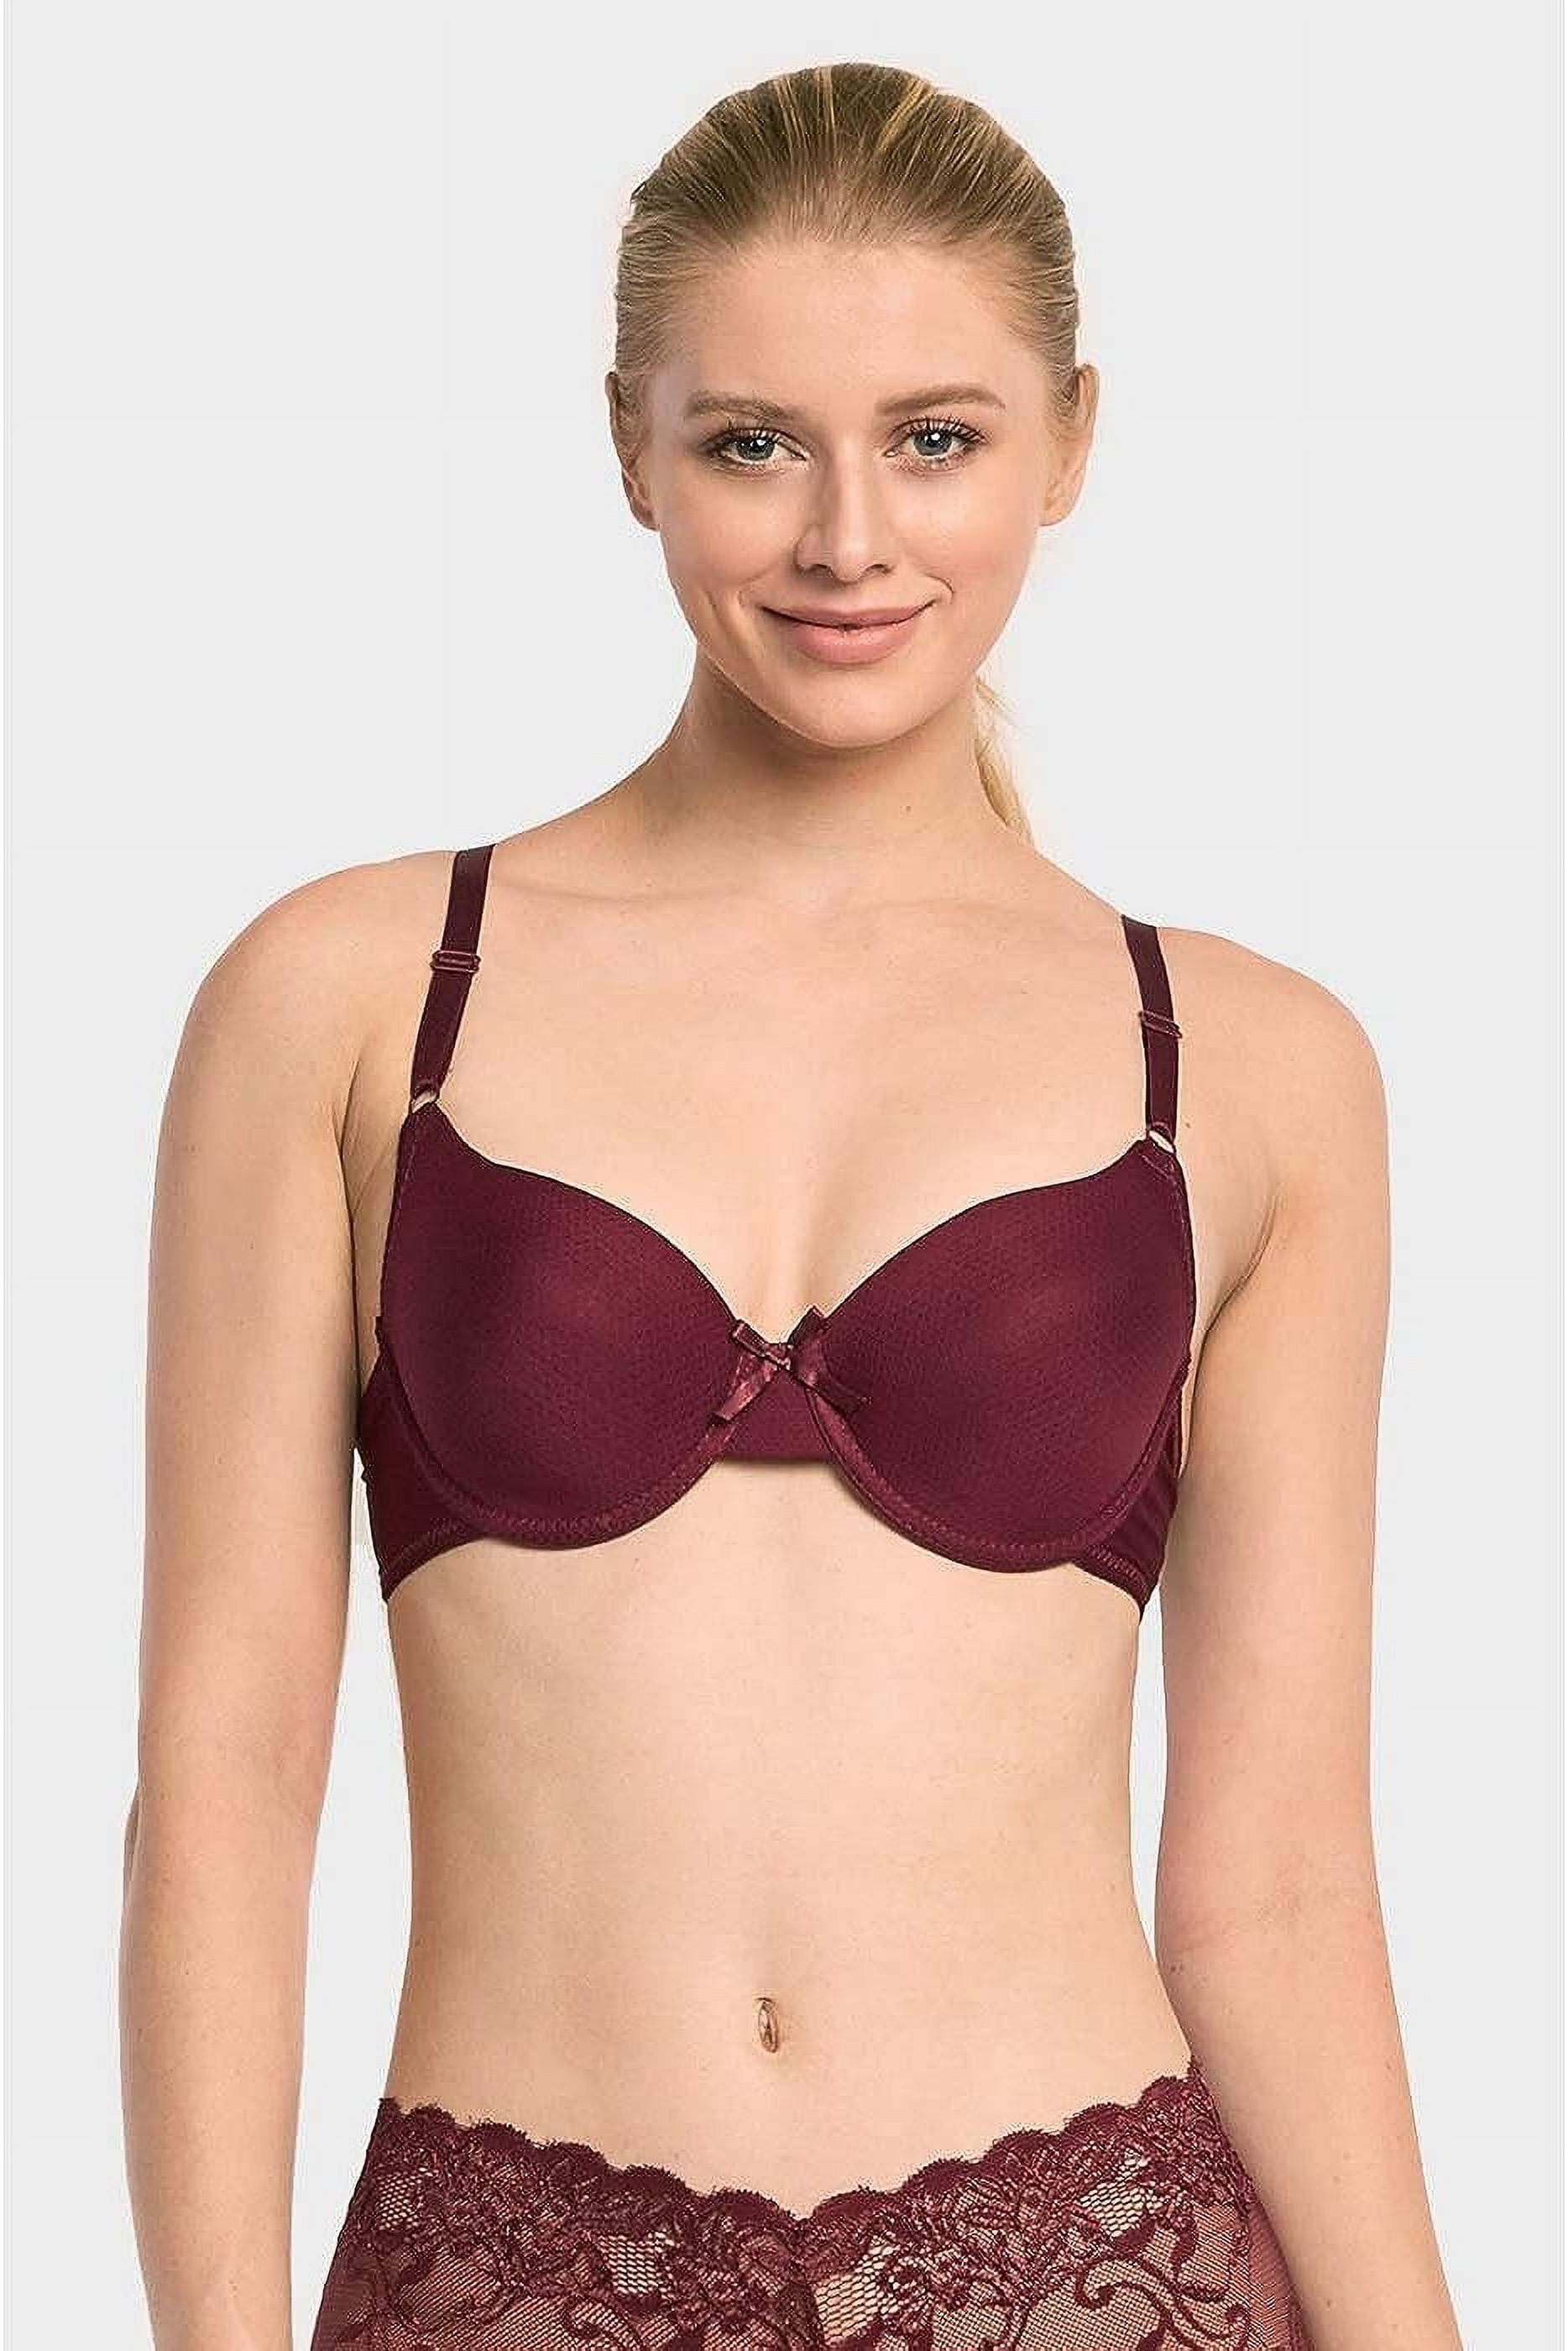 6-PACK Sofra Women's Full Cup Lace Trim Cotton Bra (BR4237PLD) (As Is Item)  - Bed Bath & Beyond - 32964777